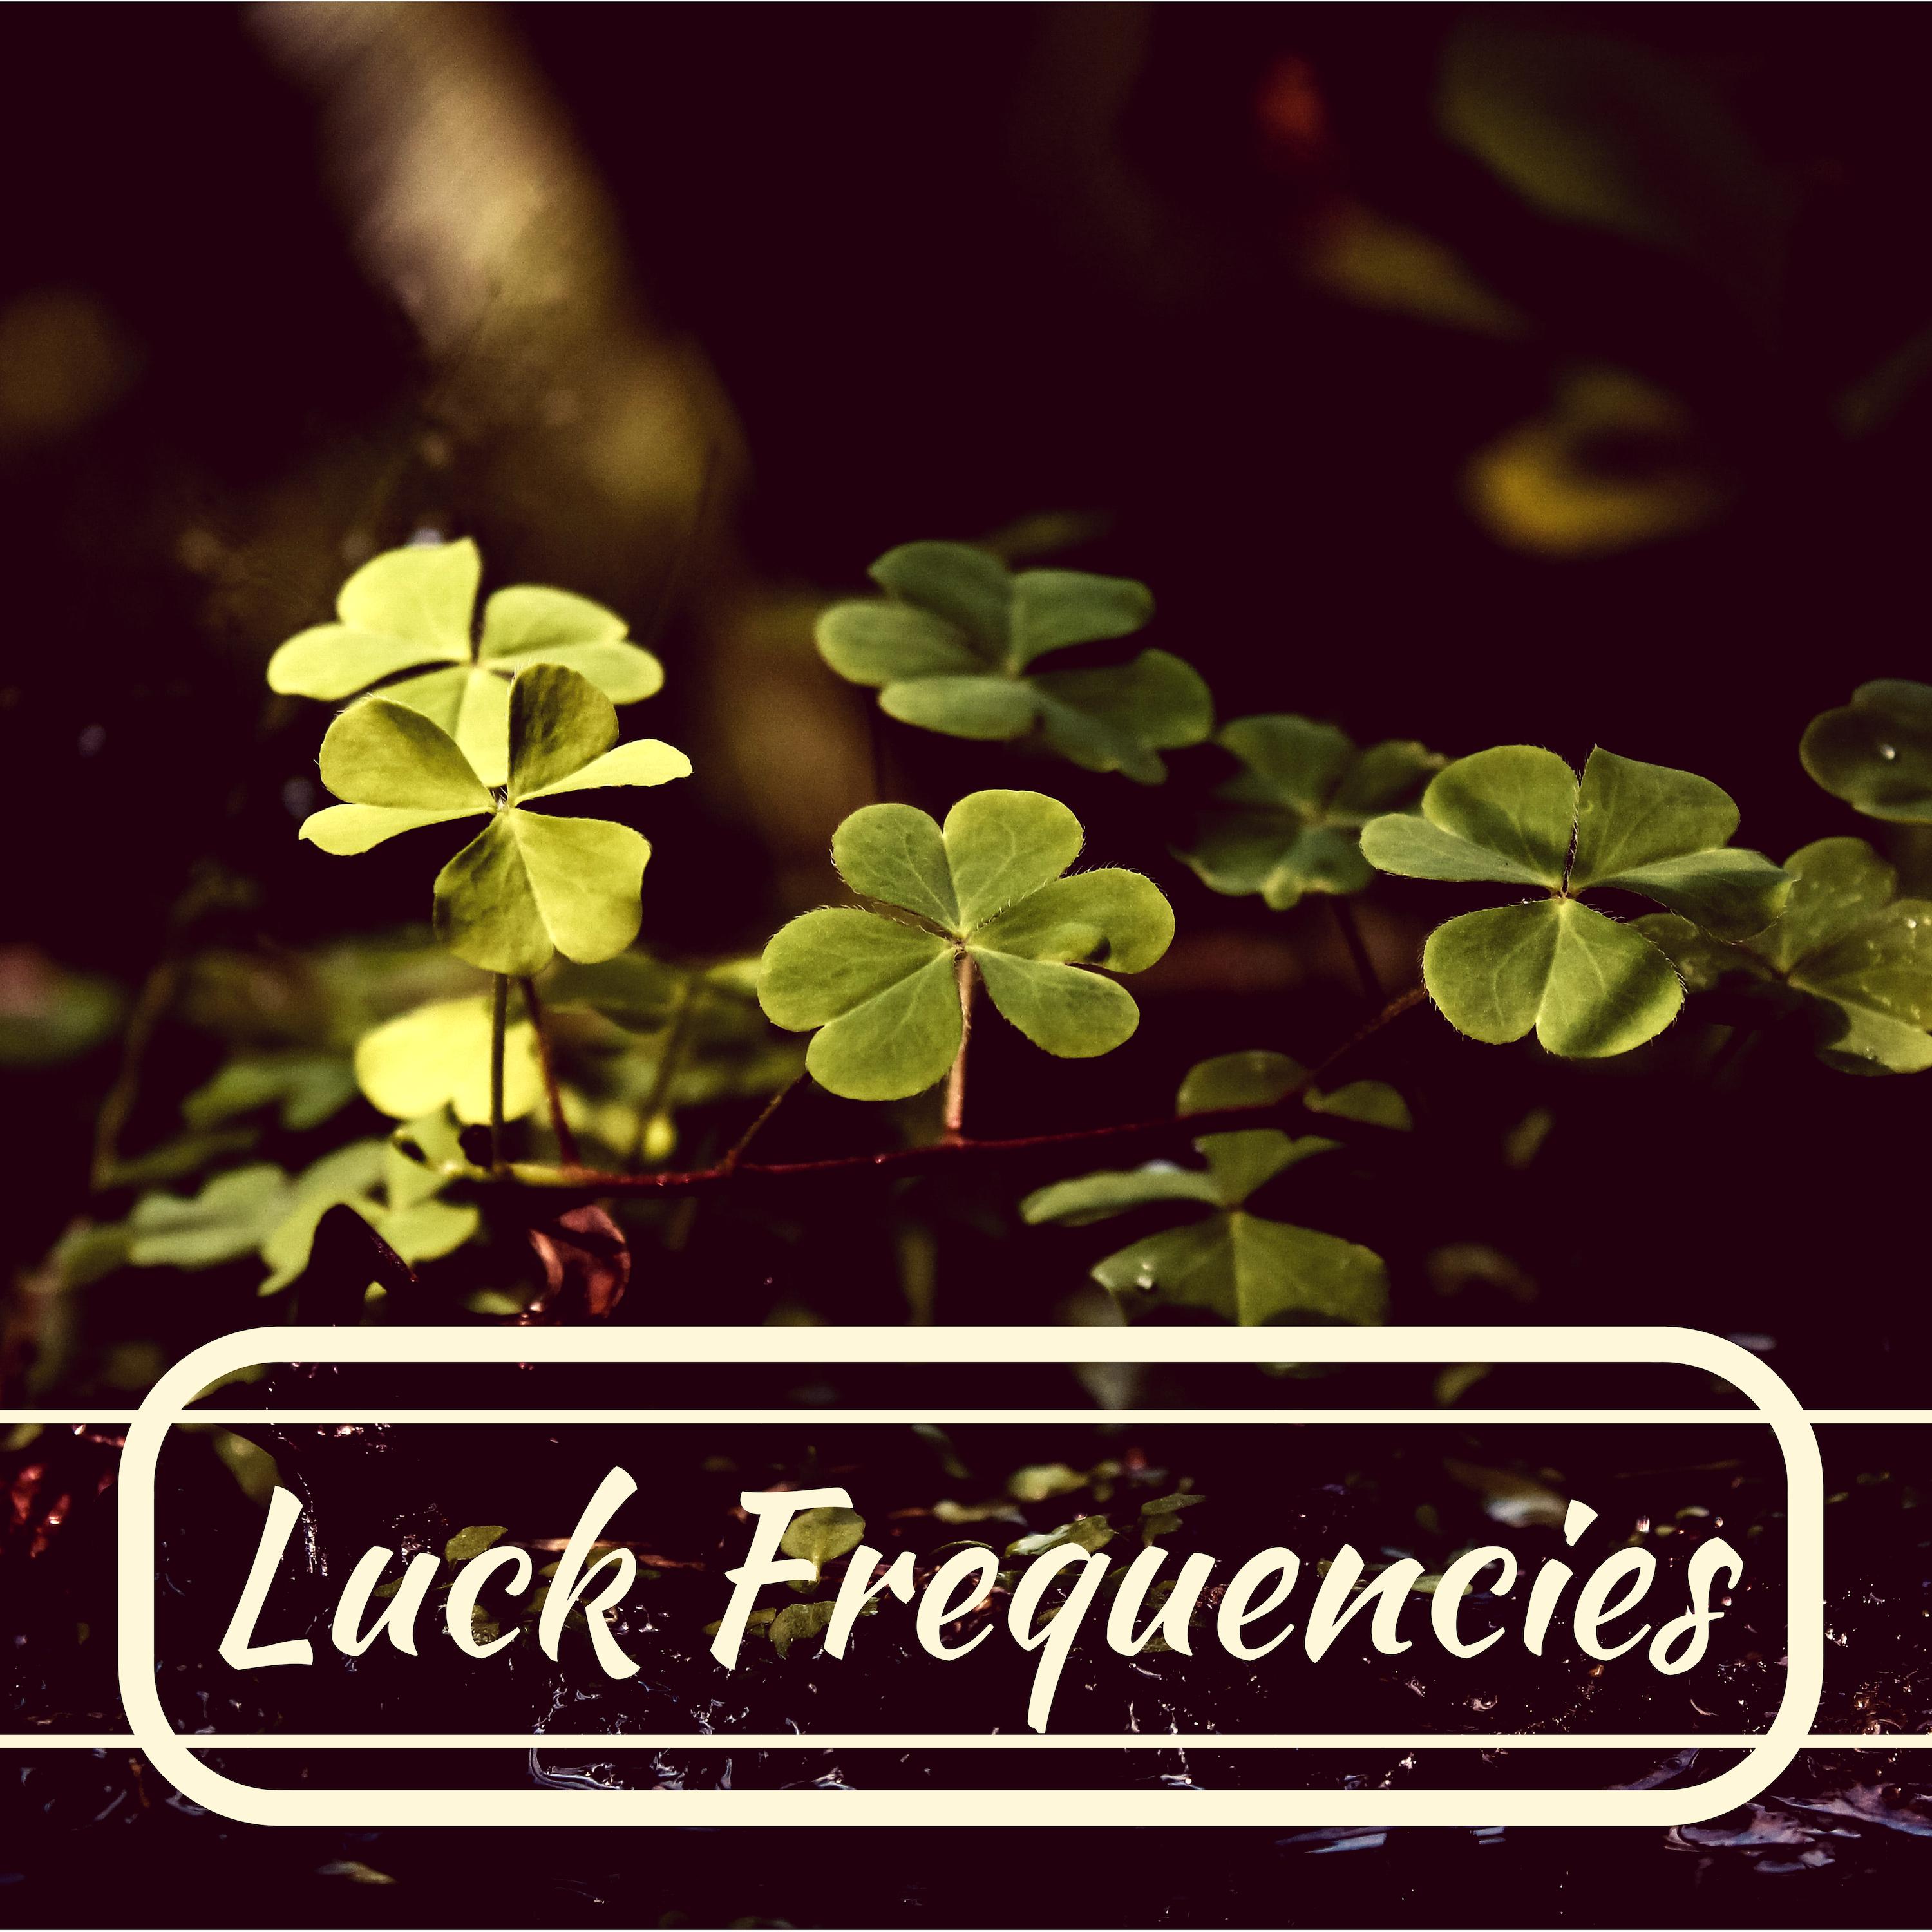 Luck Frequencies